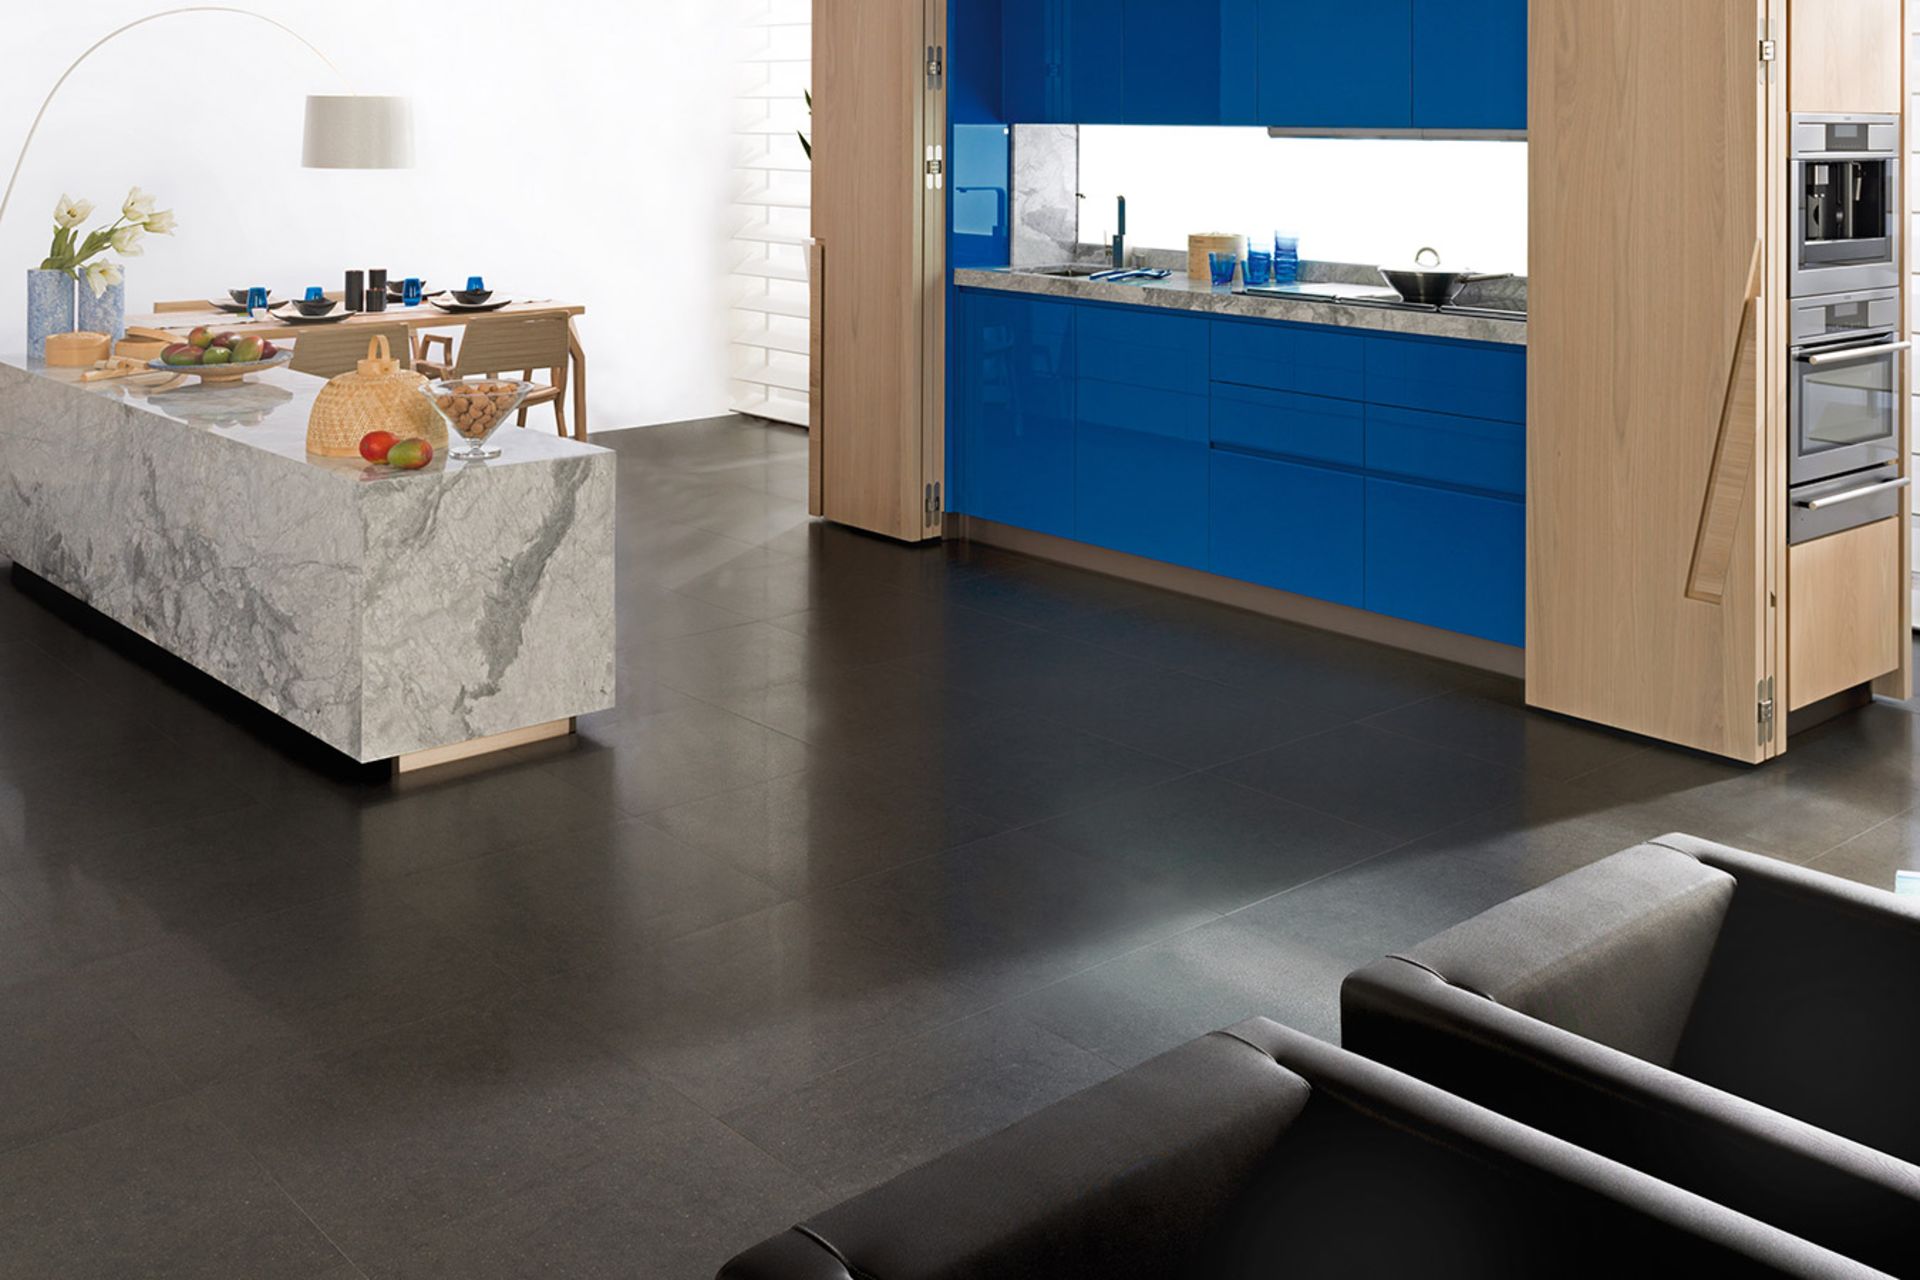 8.52 Square Meters of Porcelanosa Avenue Black Nature Wall and Floor Tiles. 59.6x59.6cm per tile.